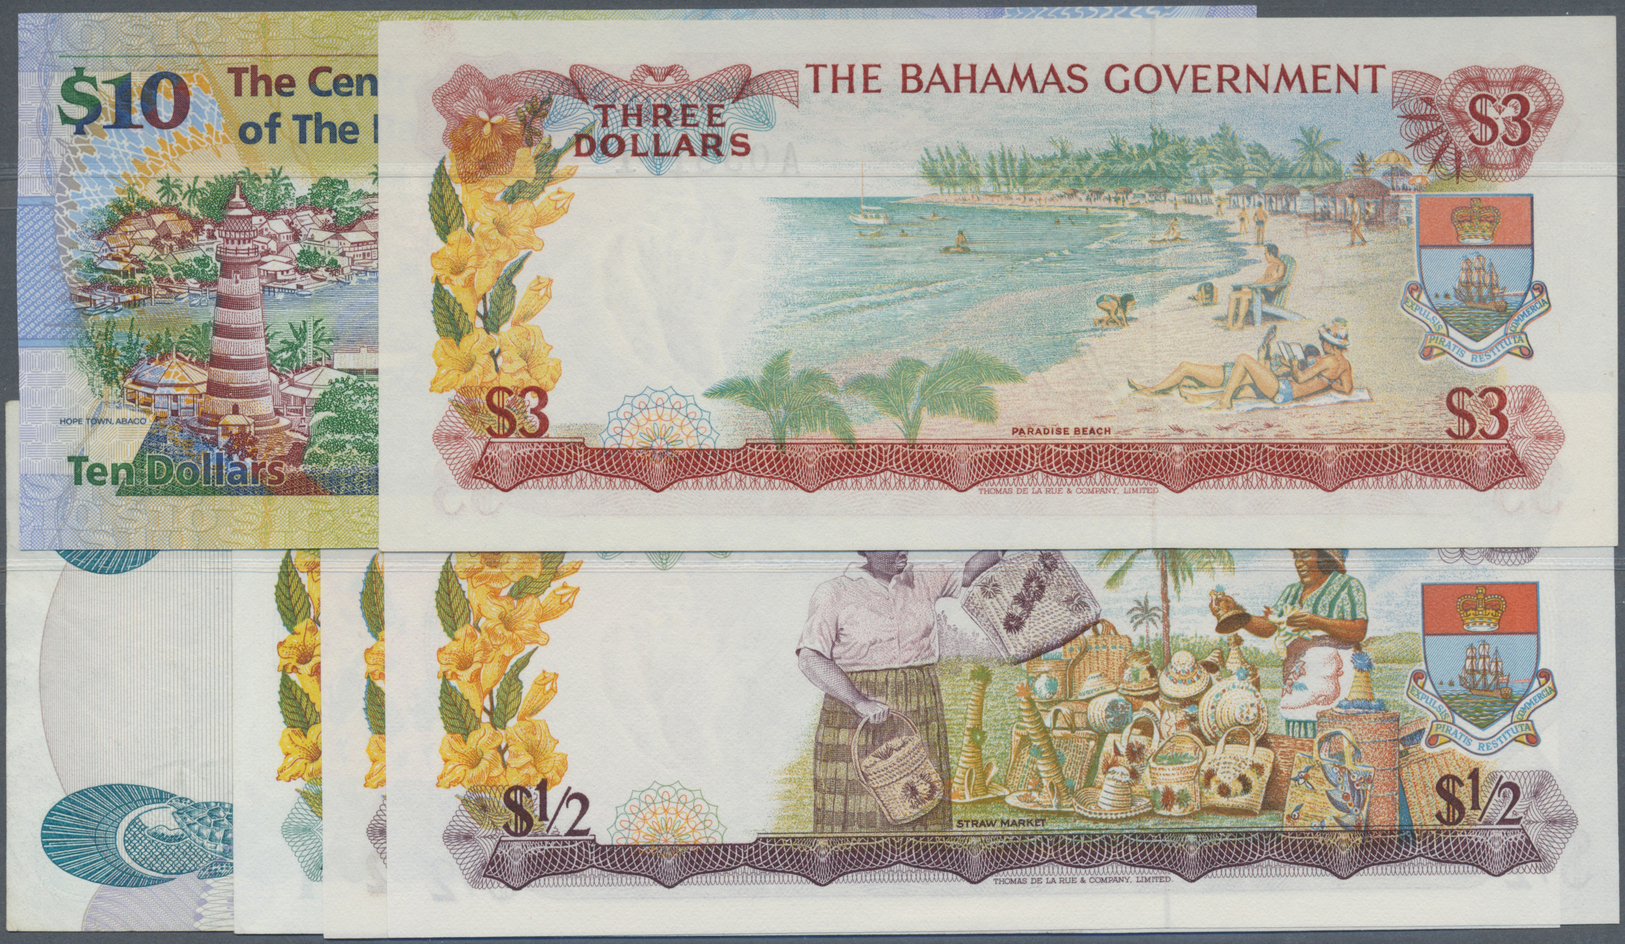 00235 Bahamas: Set Of 20 Notes Containing 50 Cents L.1968 (UNC), 1 Dollar L.1974 (aUNC), 50 Cents L.1965 (UNC), 3 Dollar - Bahamas